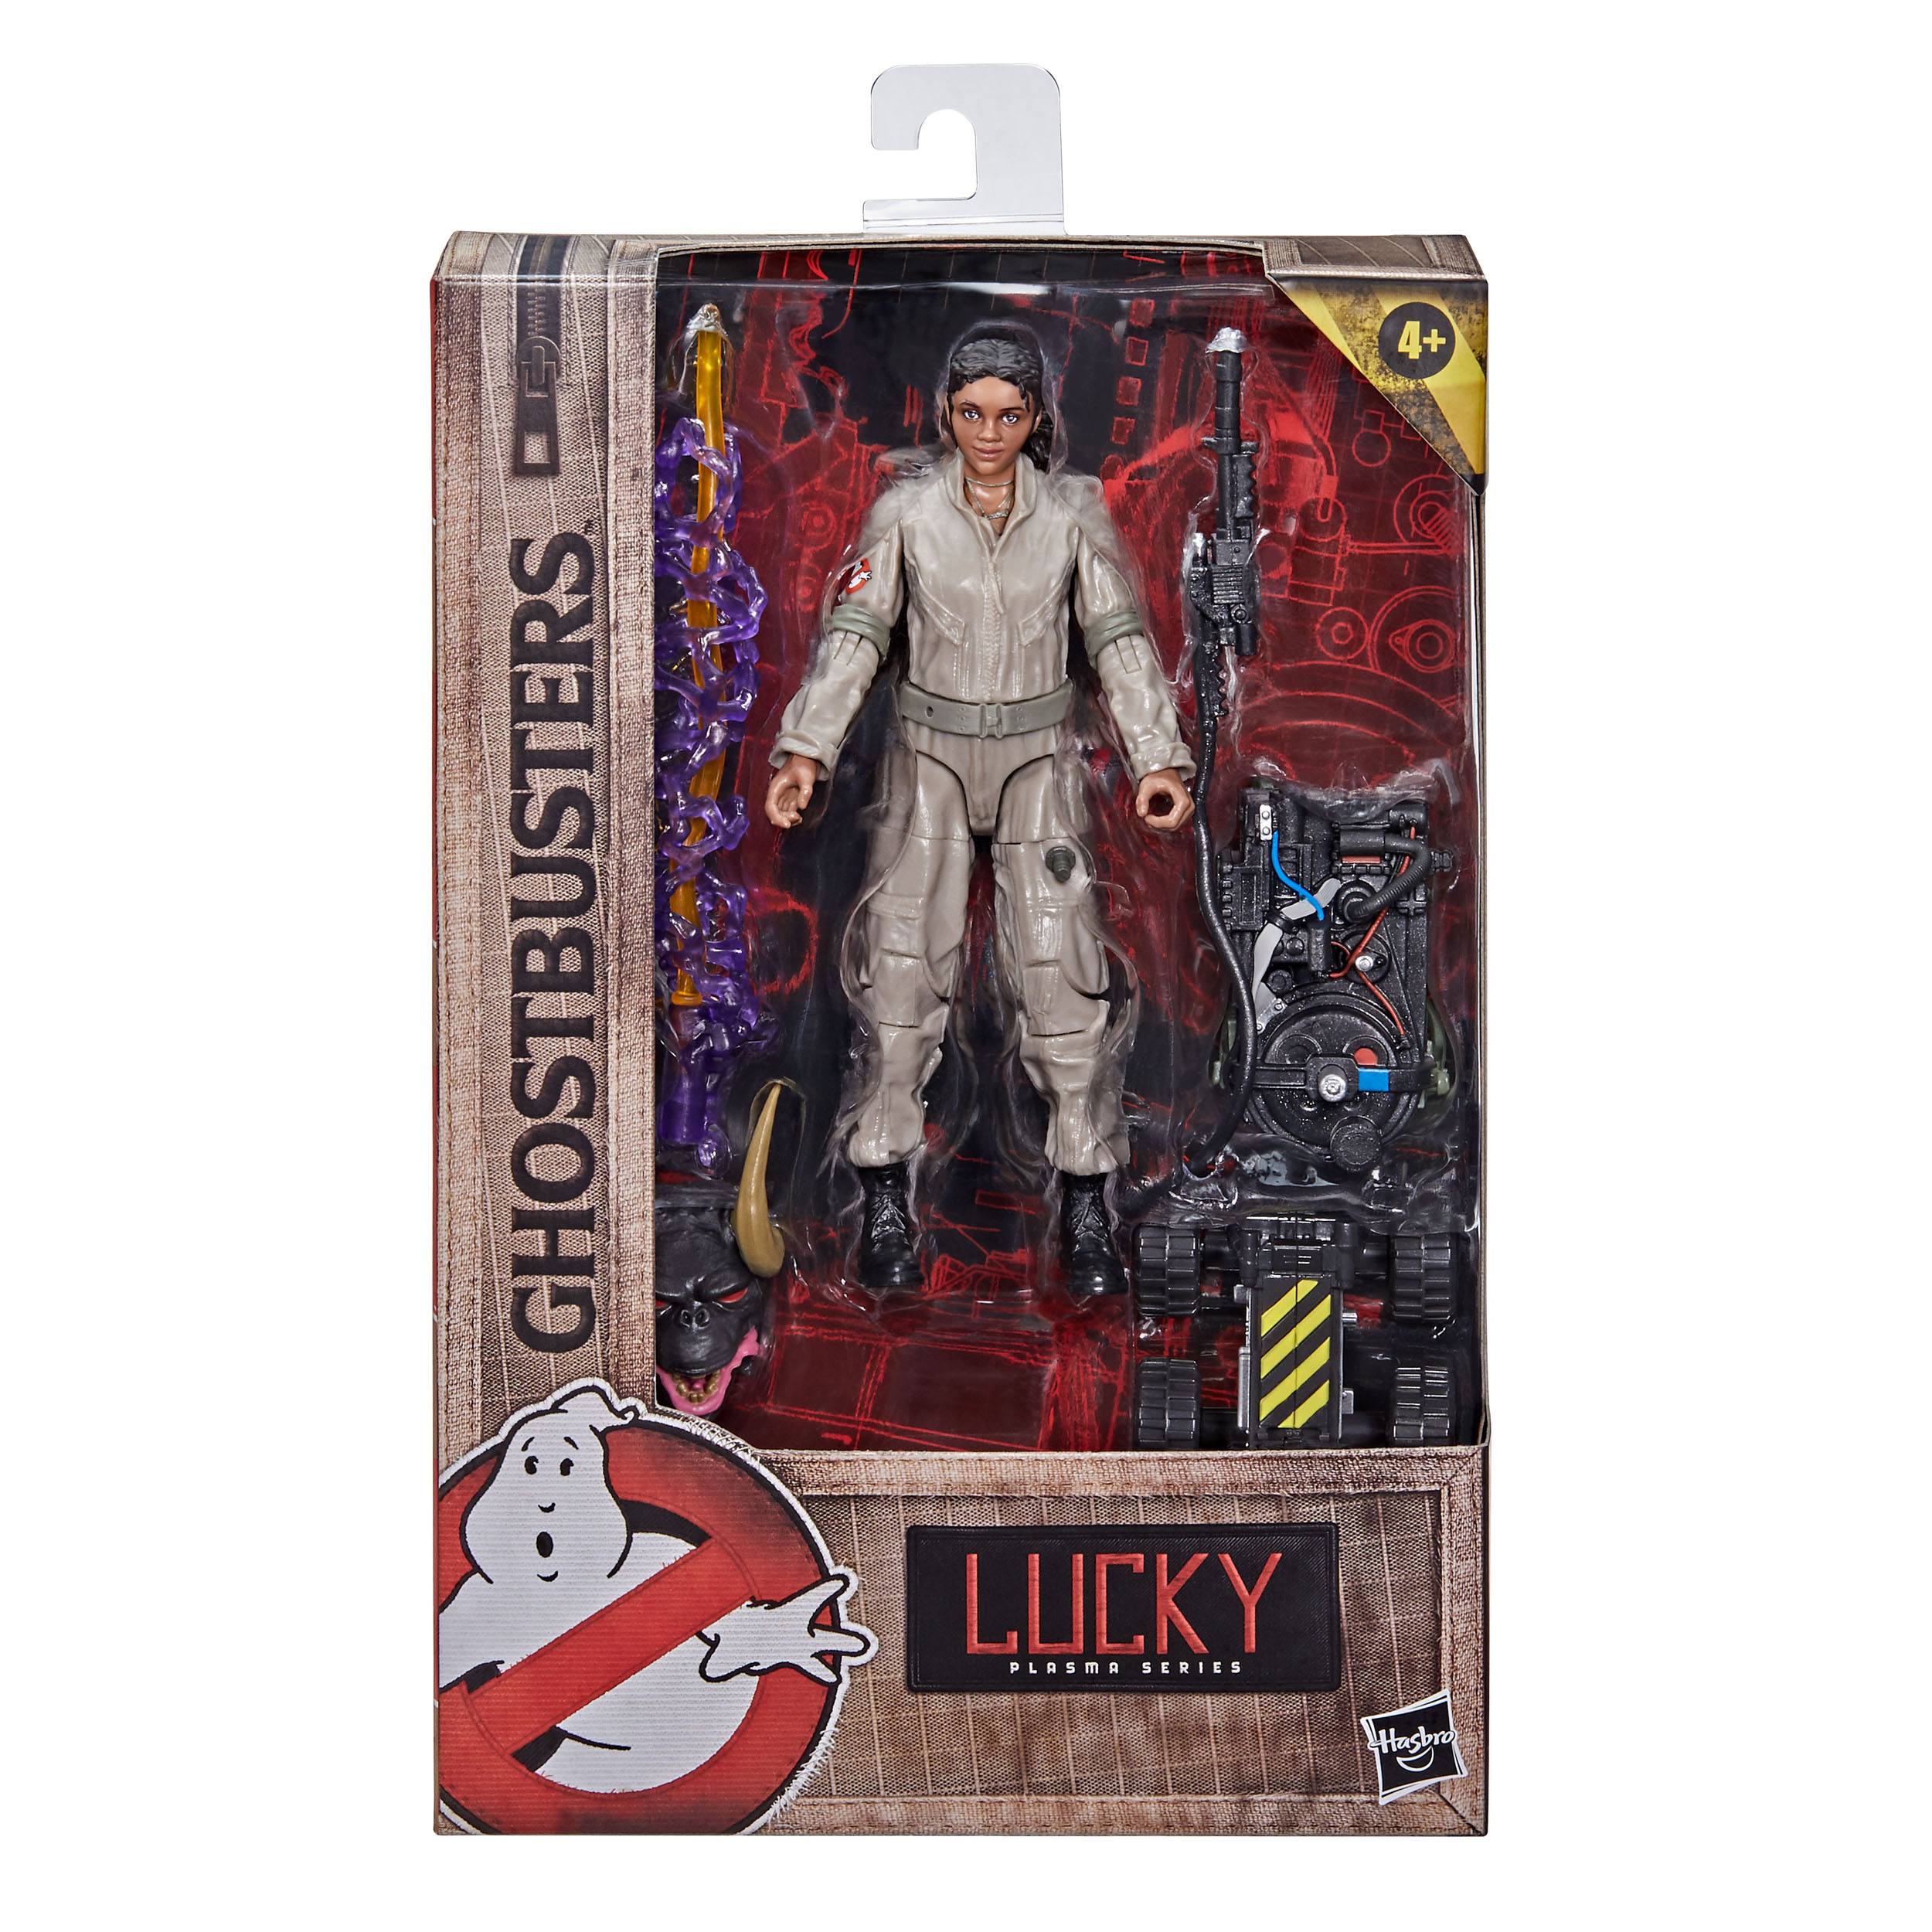 Ghostbusters Plasma Series Ghostbusters: Afterlife Lucky  5010993853328